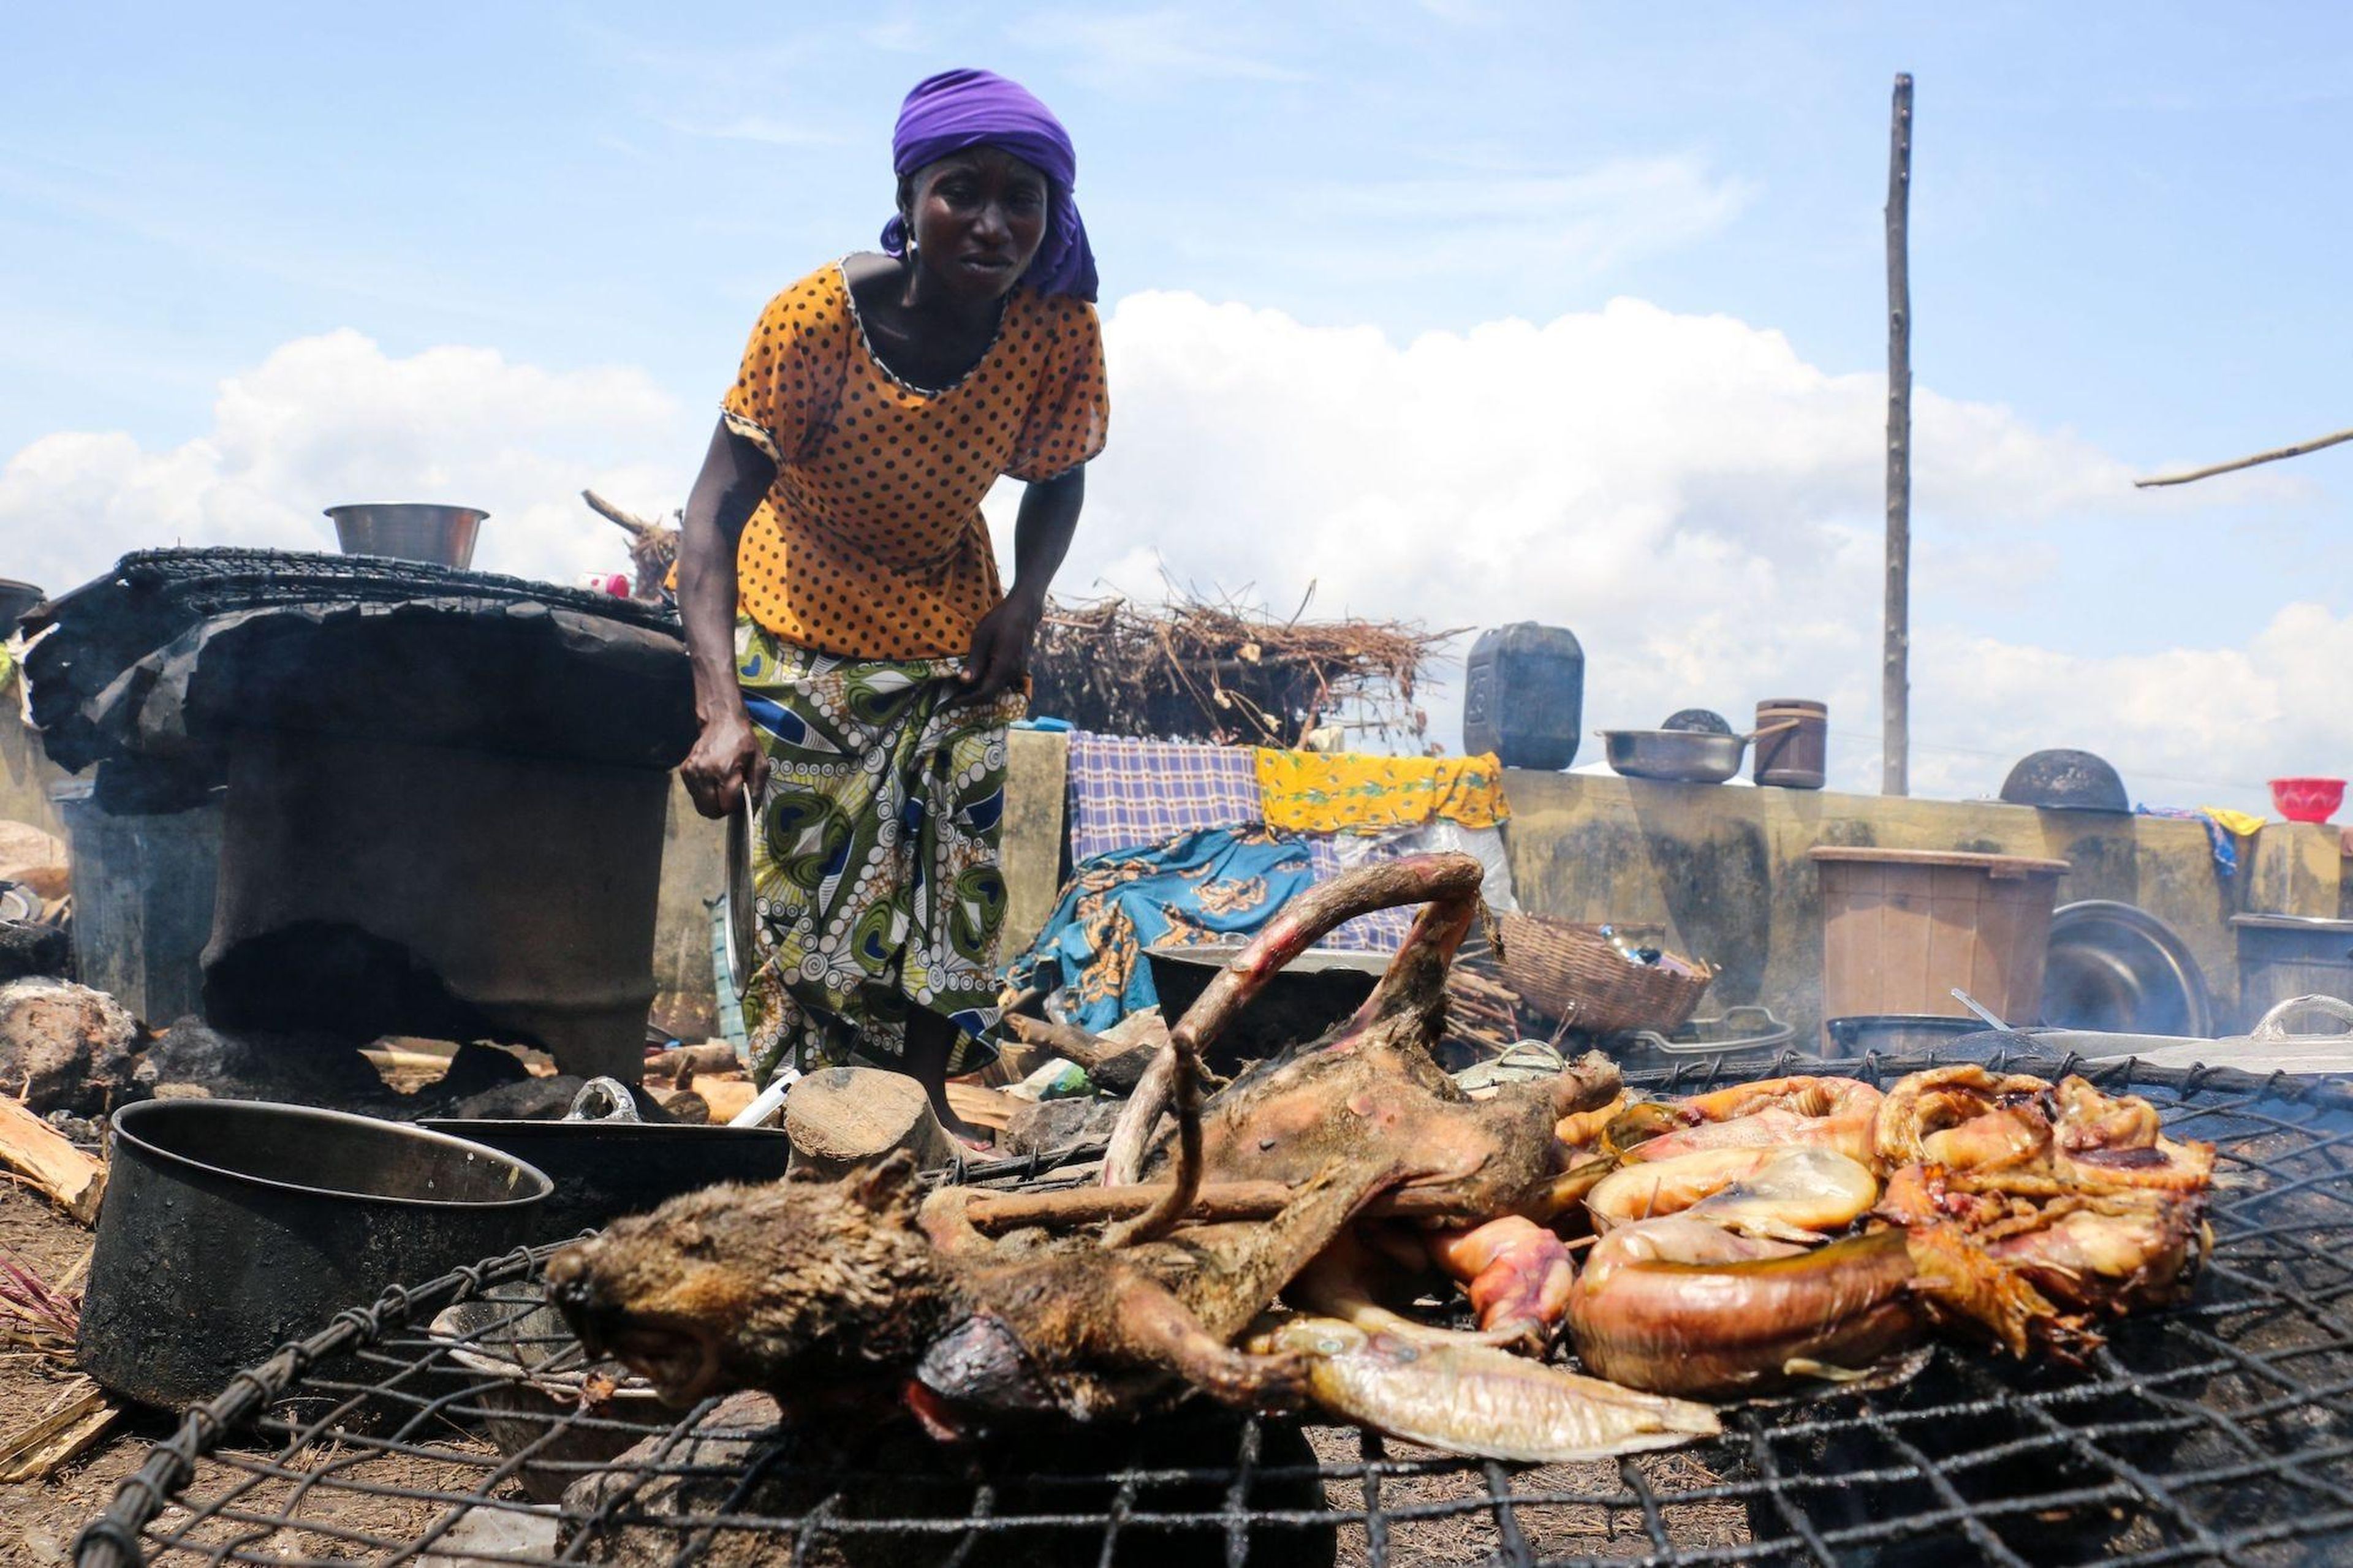 A woman displaced by the recent wave of floods in Konto Karfi, prepares to roast bushmeat at an outdoor facility of an Internally displaced people (IDPs) camp in Otokiti, Kogi State, on September 19, 2018